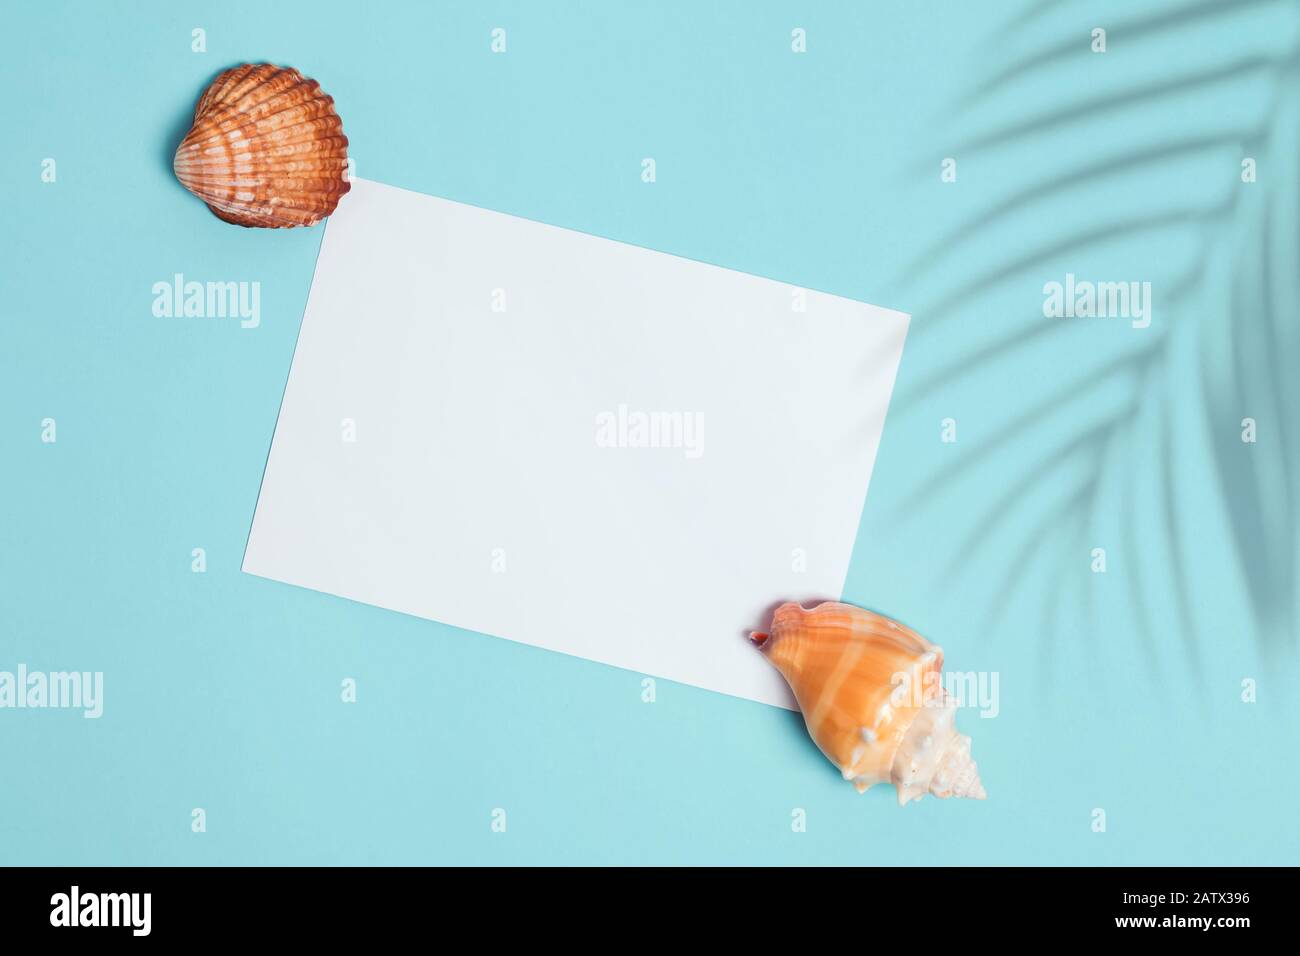 Seashells and palm shadow on blue background, top view. Summer vacation planning. Flat lay with empty paper, place for text Stock Photo